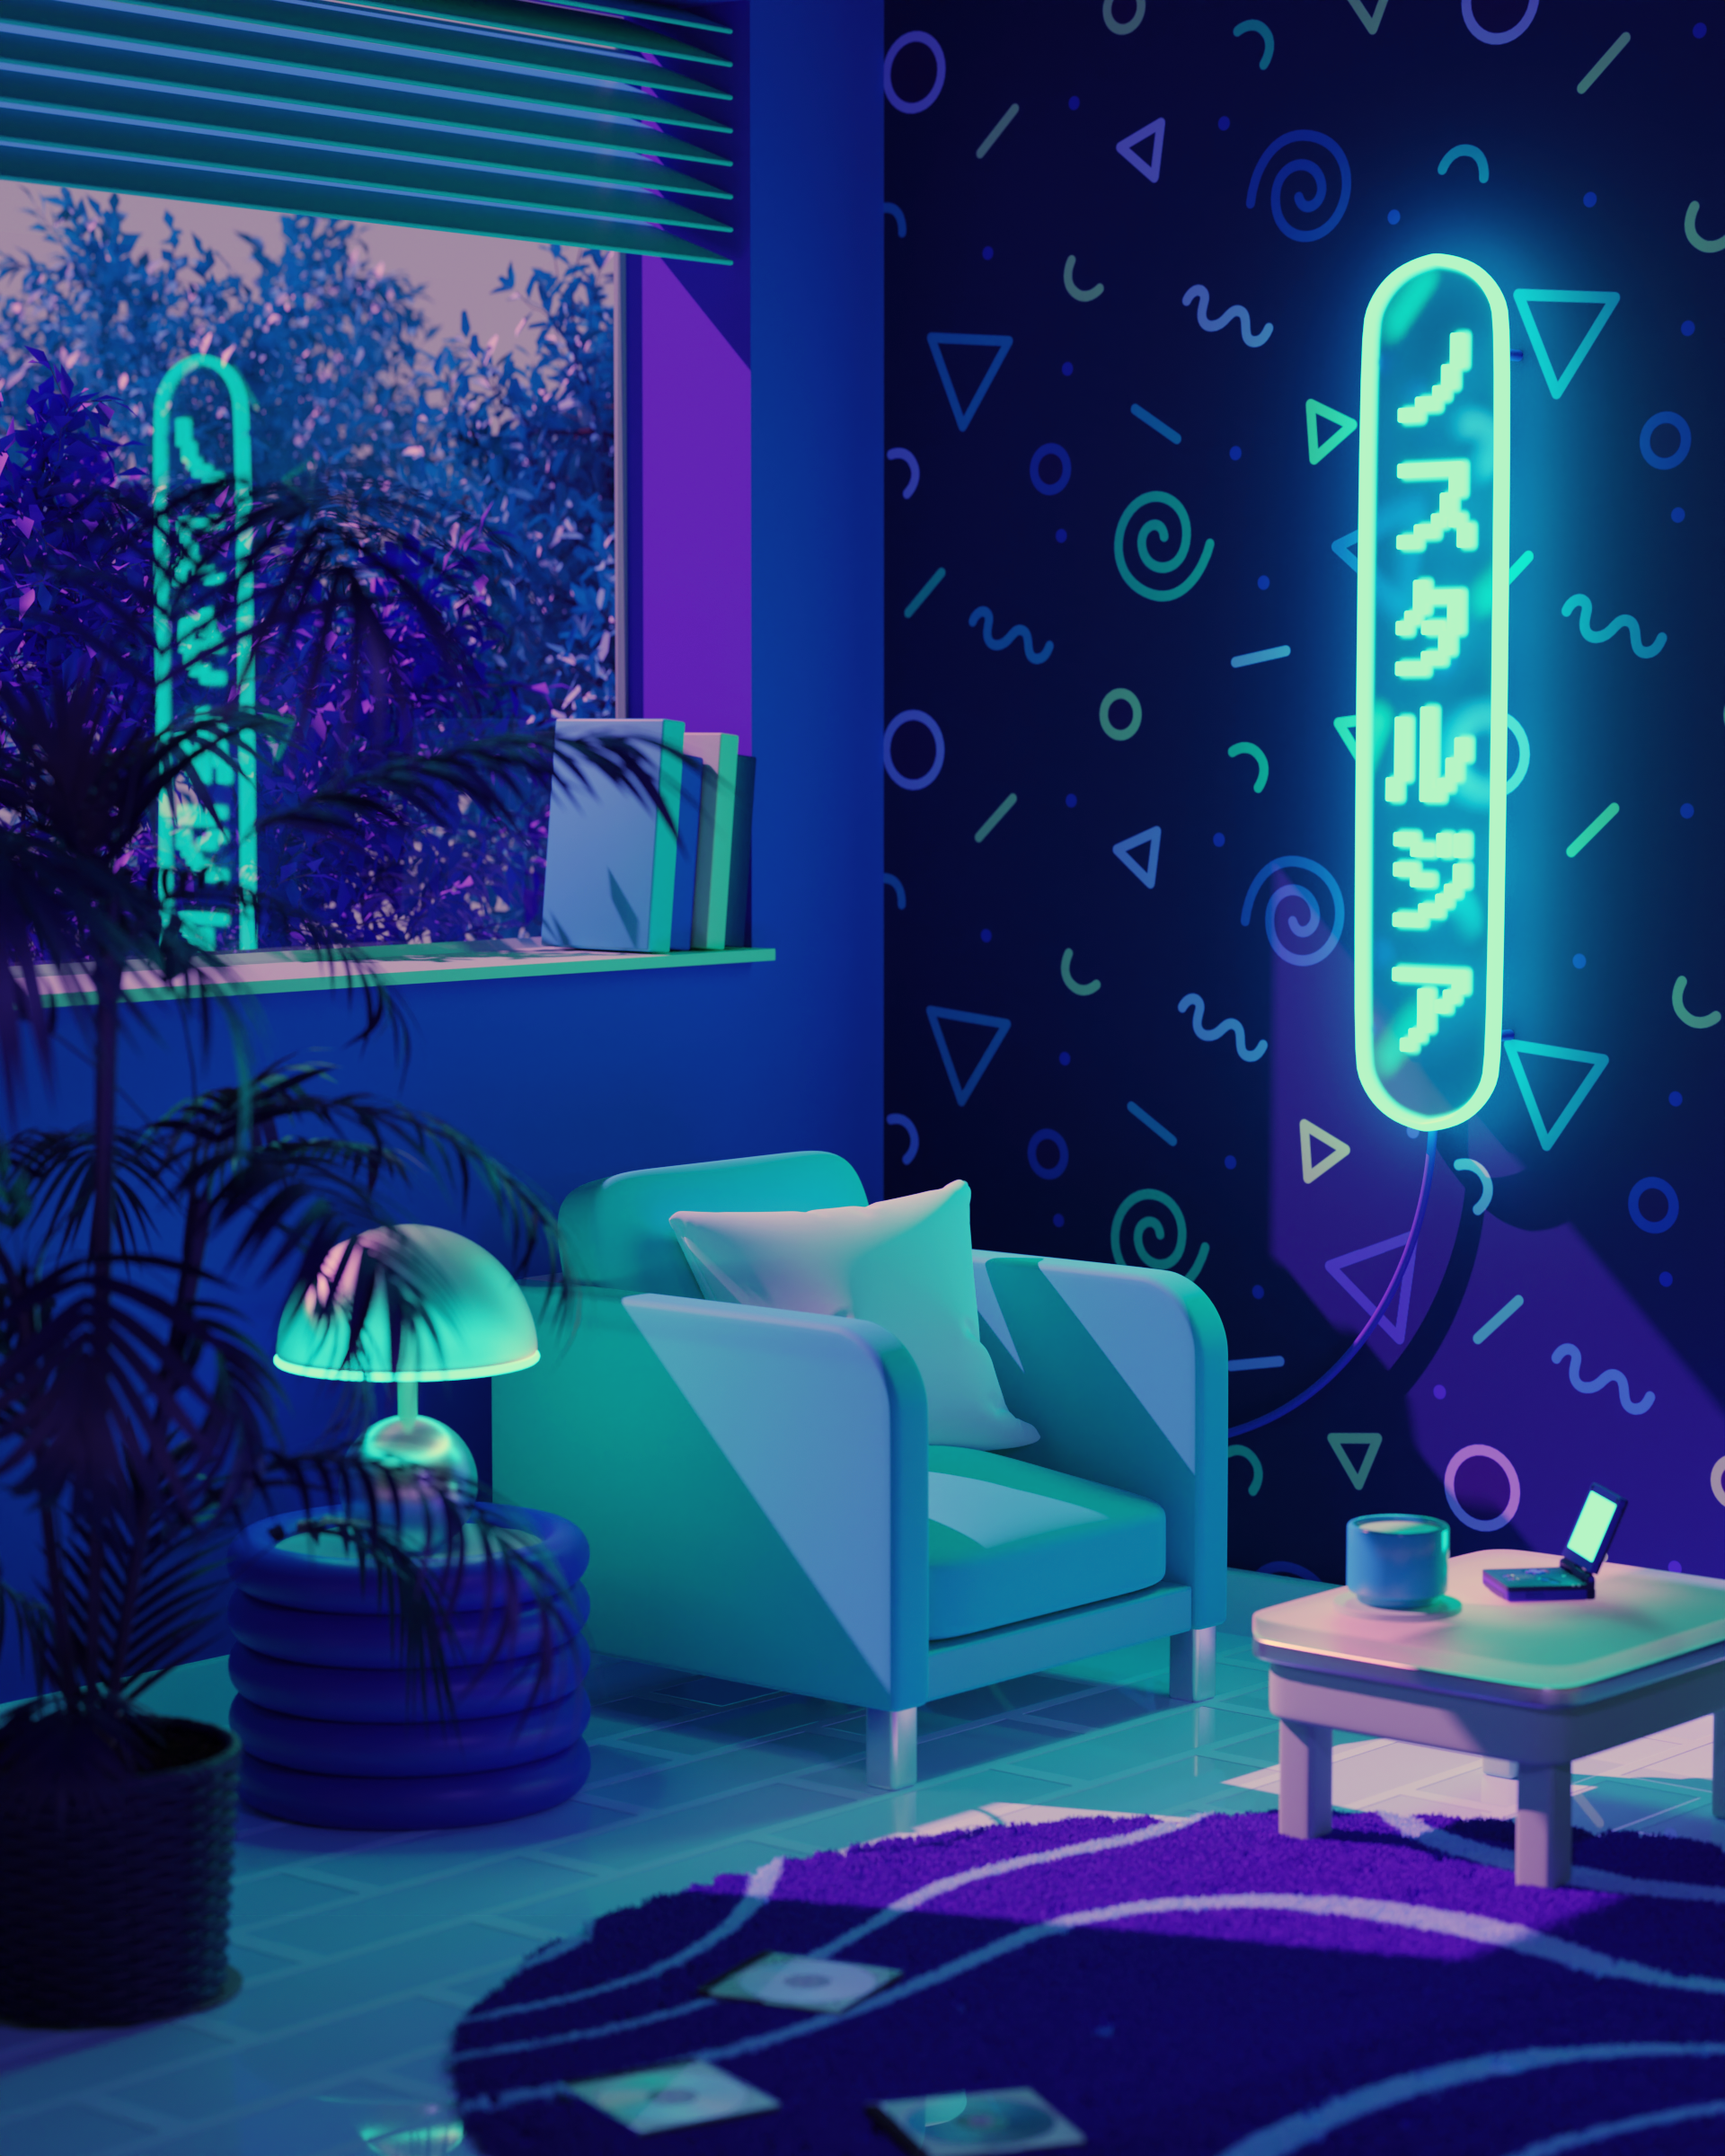 A modern armchair sits in the center of a dimly-lit room, beside a neon light reading "nostalgia" in Japanese. To its left is a futuristic lamp beside a large palm plant. The window sill behind the armchair holds a few books, and through the window, large purple trees can be seen. On a small coffee table sits a gameboy and a cup of tea. There are CDs scattered on the floor, atop a round fluffy rug.